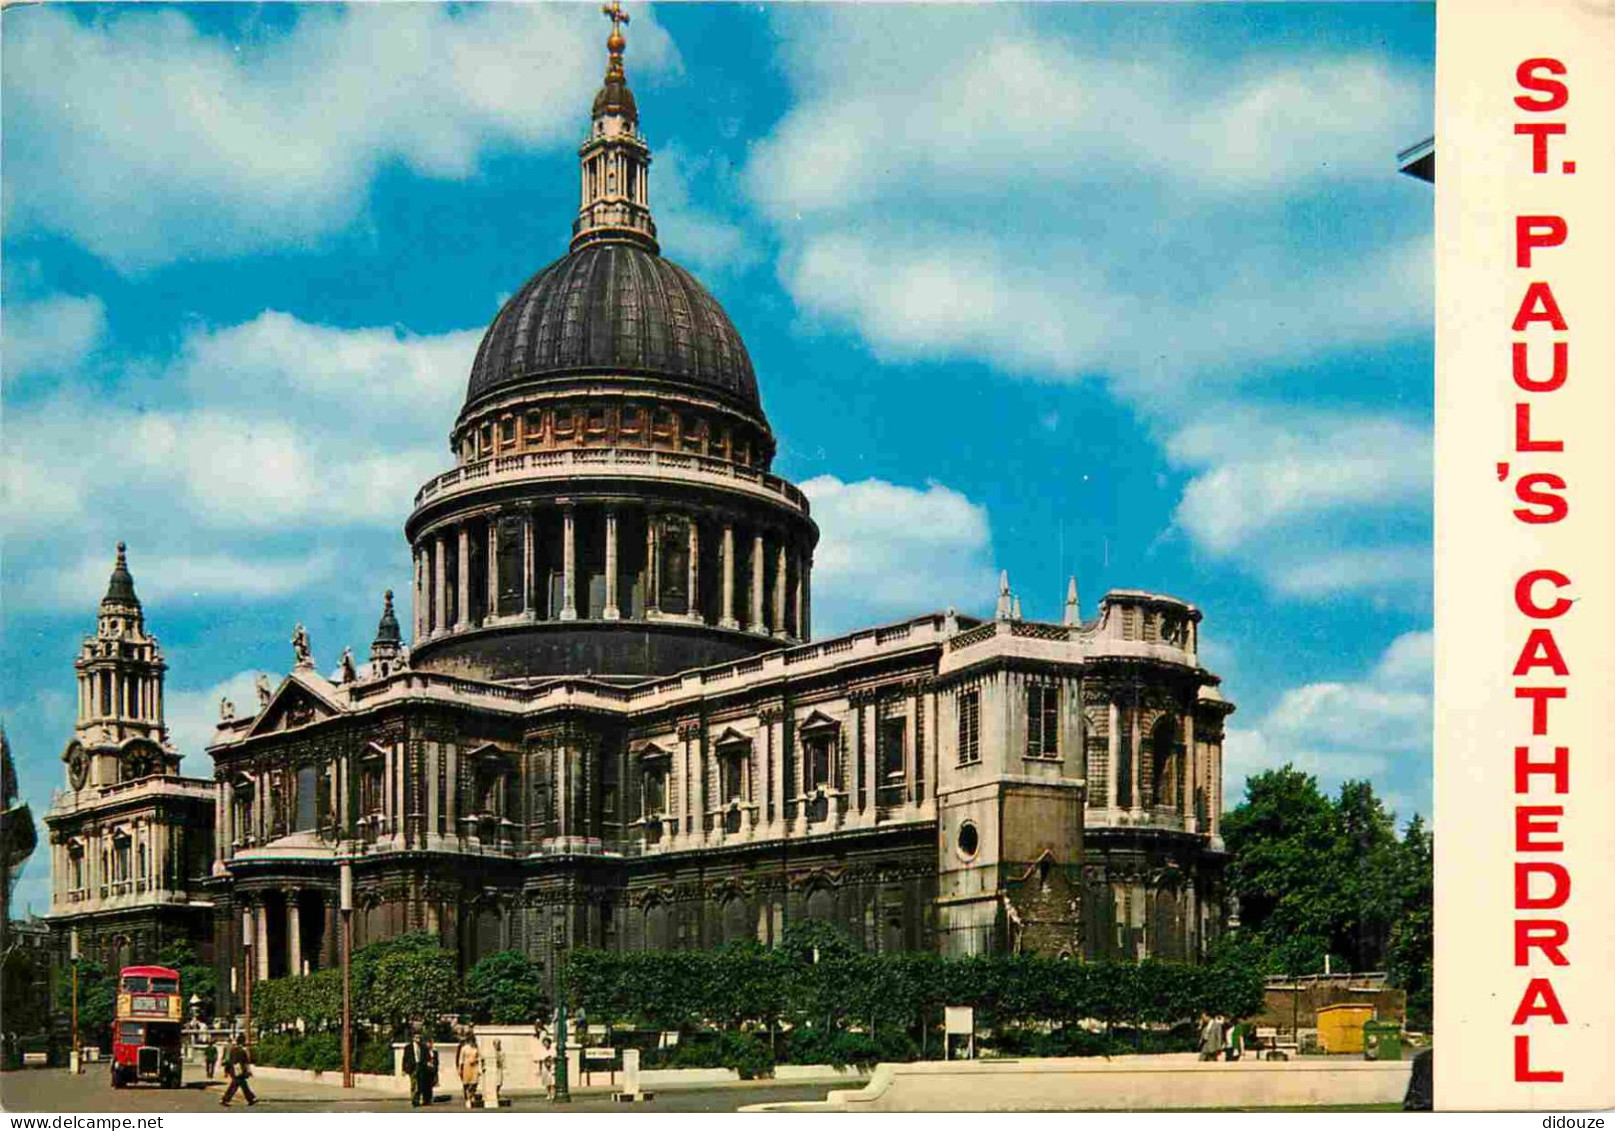 Angleterre - London - St Paul's Cathedral - Cathédrale - Automobiles - Bus - London - England - Royaume Uni - UK - Unite - St. Paul's Cathedral